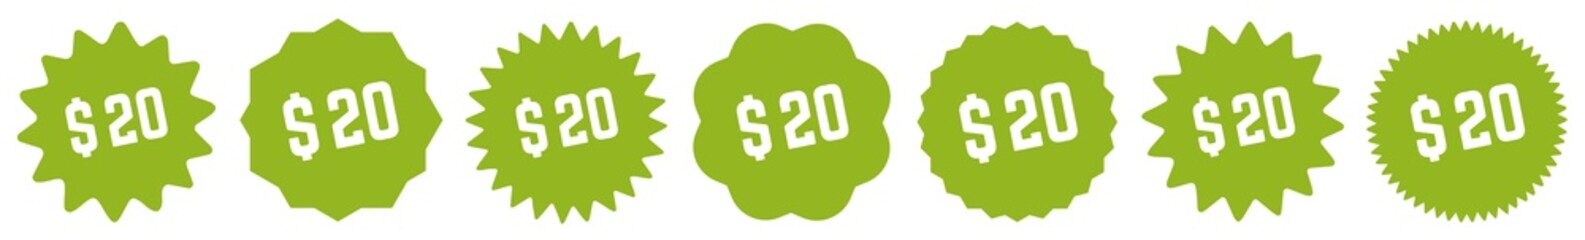 20 Price Tag Green Eco | 20 Dollar | Special Offer Icon | Sale Sticker | Deal Label | Variations